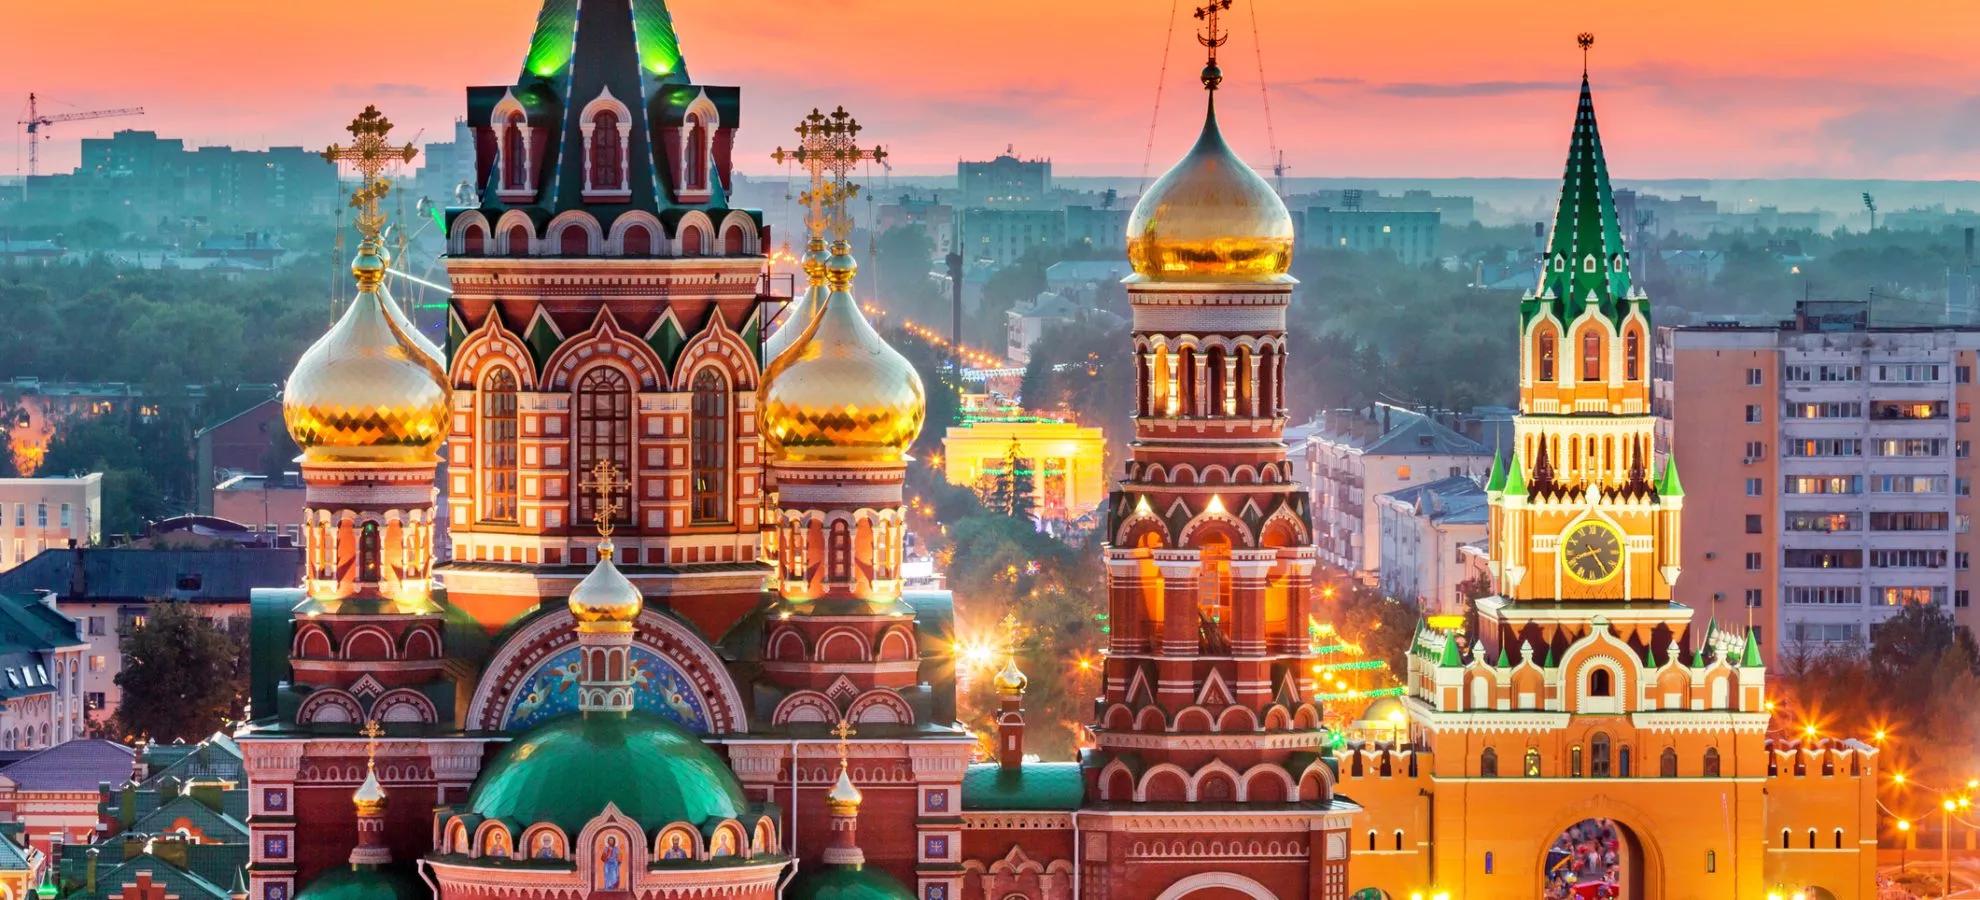 Rusland - St. Basil's Cathedral